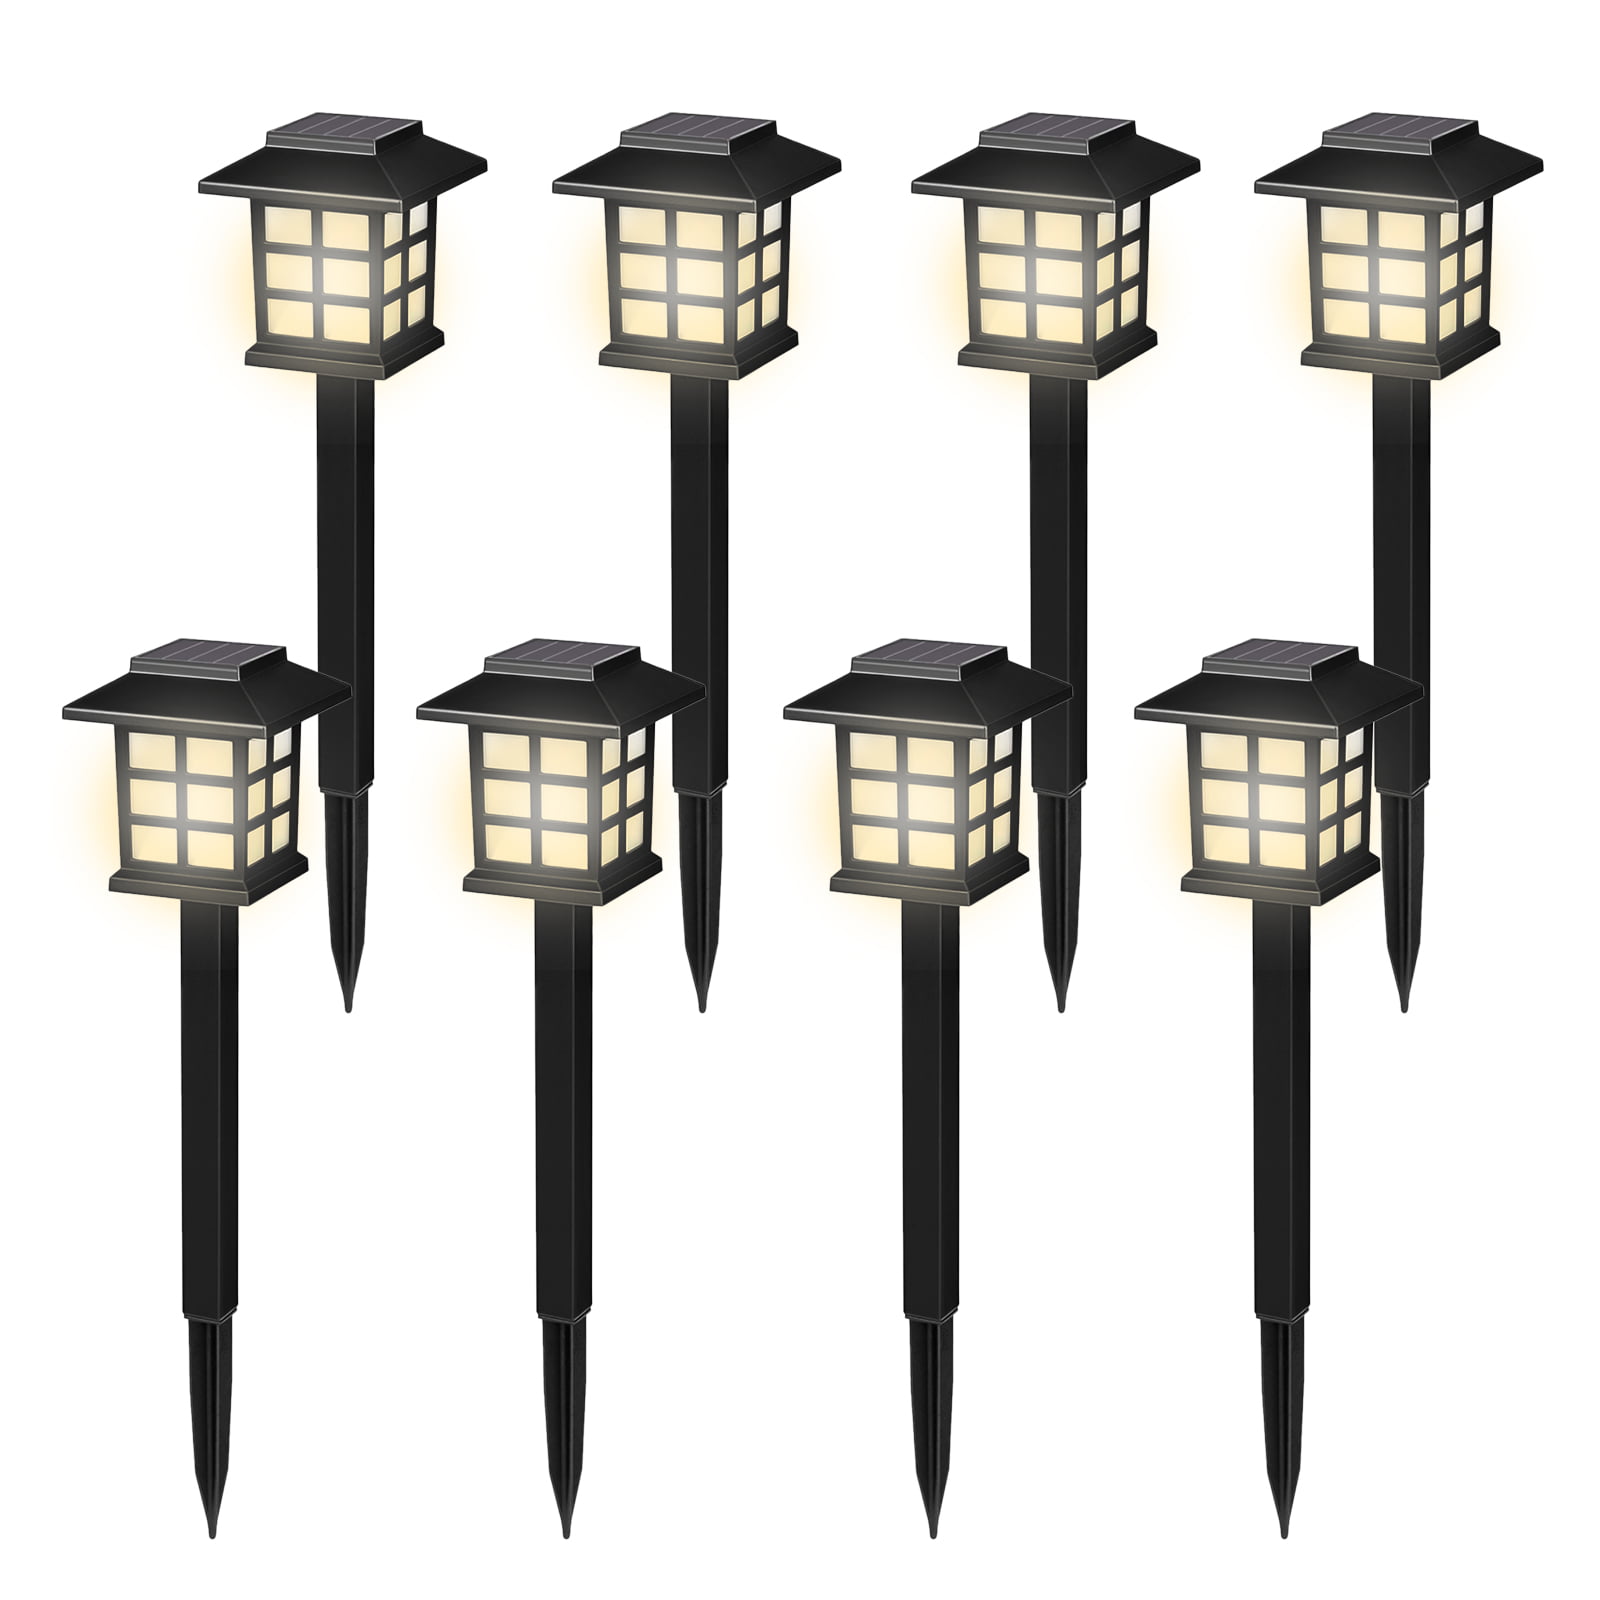 2/4/6/8 Pack LED Solar Power Garden Lights Outdoor Wall Path Fence Patio Lamp 